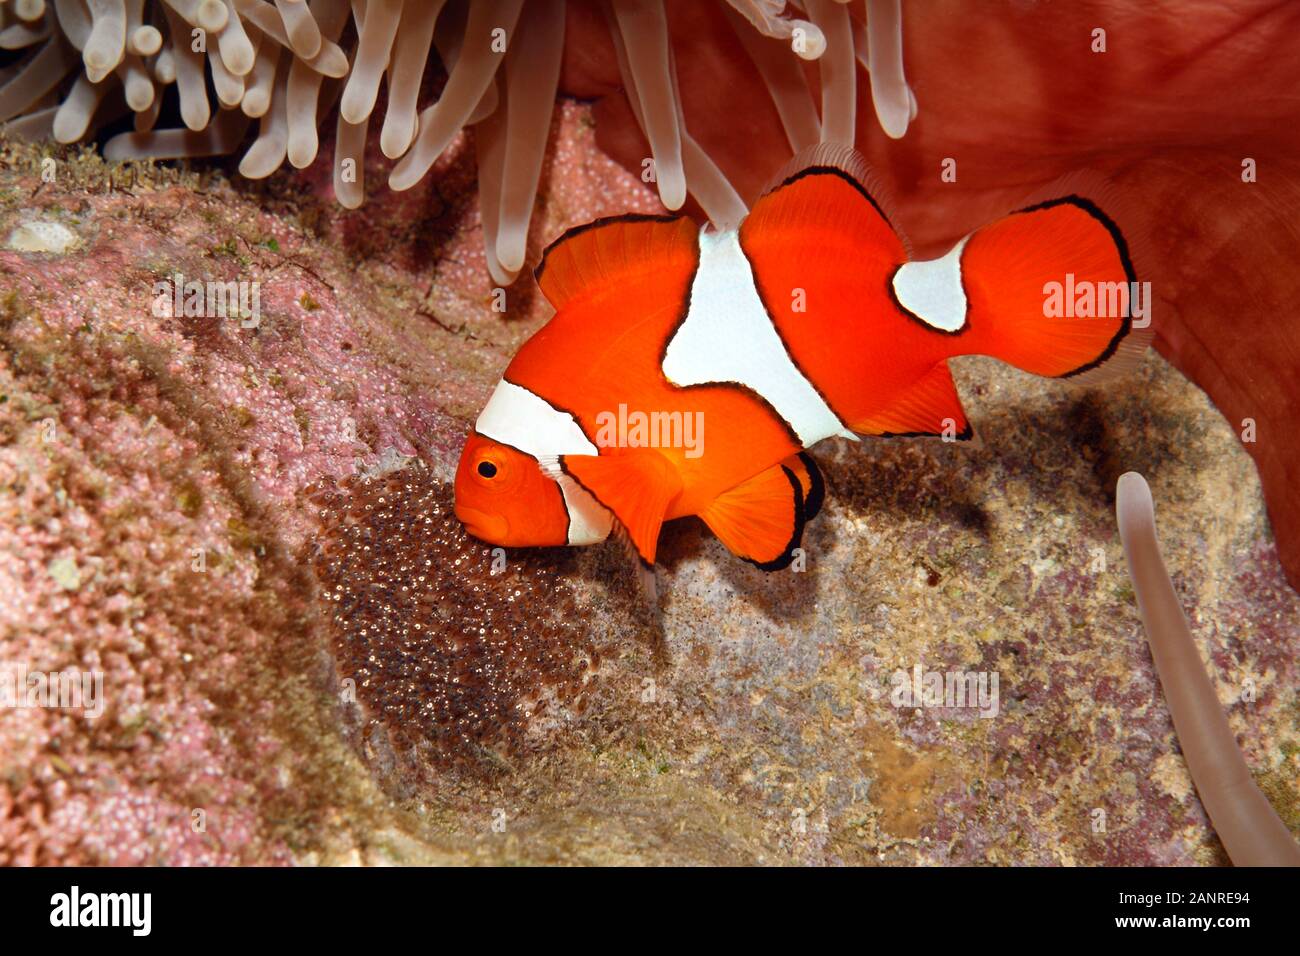 Clownfish, Amphiprion percula, male fish aerating eggs laid cleared substrate underneath the host Magnificent Sea Anemone, Heteractis magnifica Stock Photo